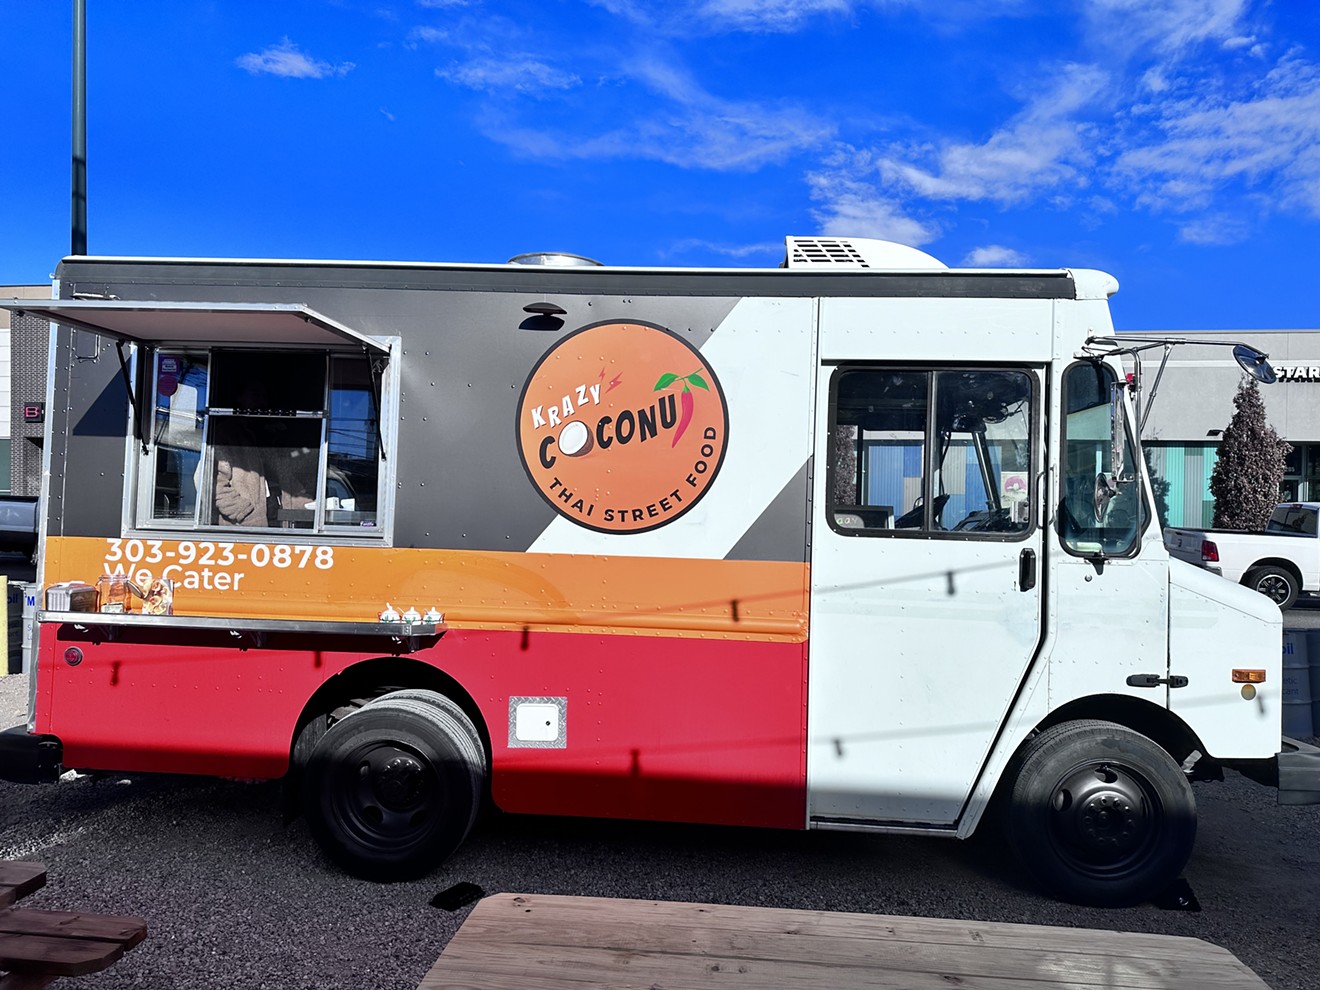 Look for the Krazy Coconut Thai Street Food truck.